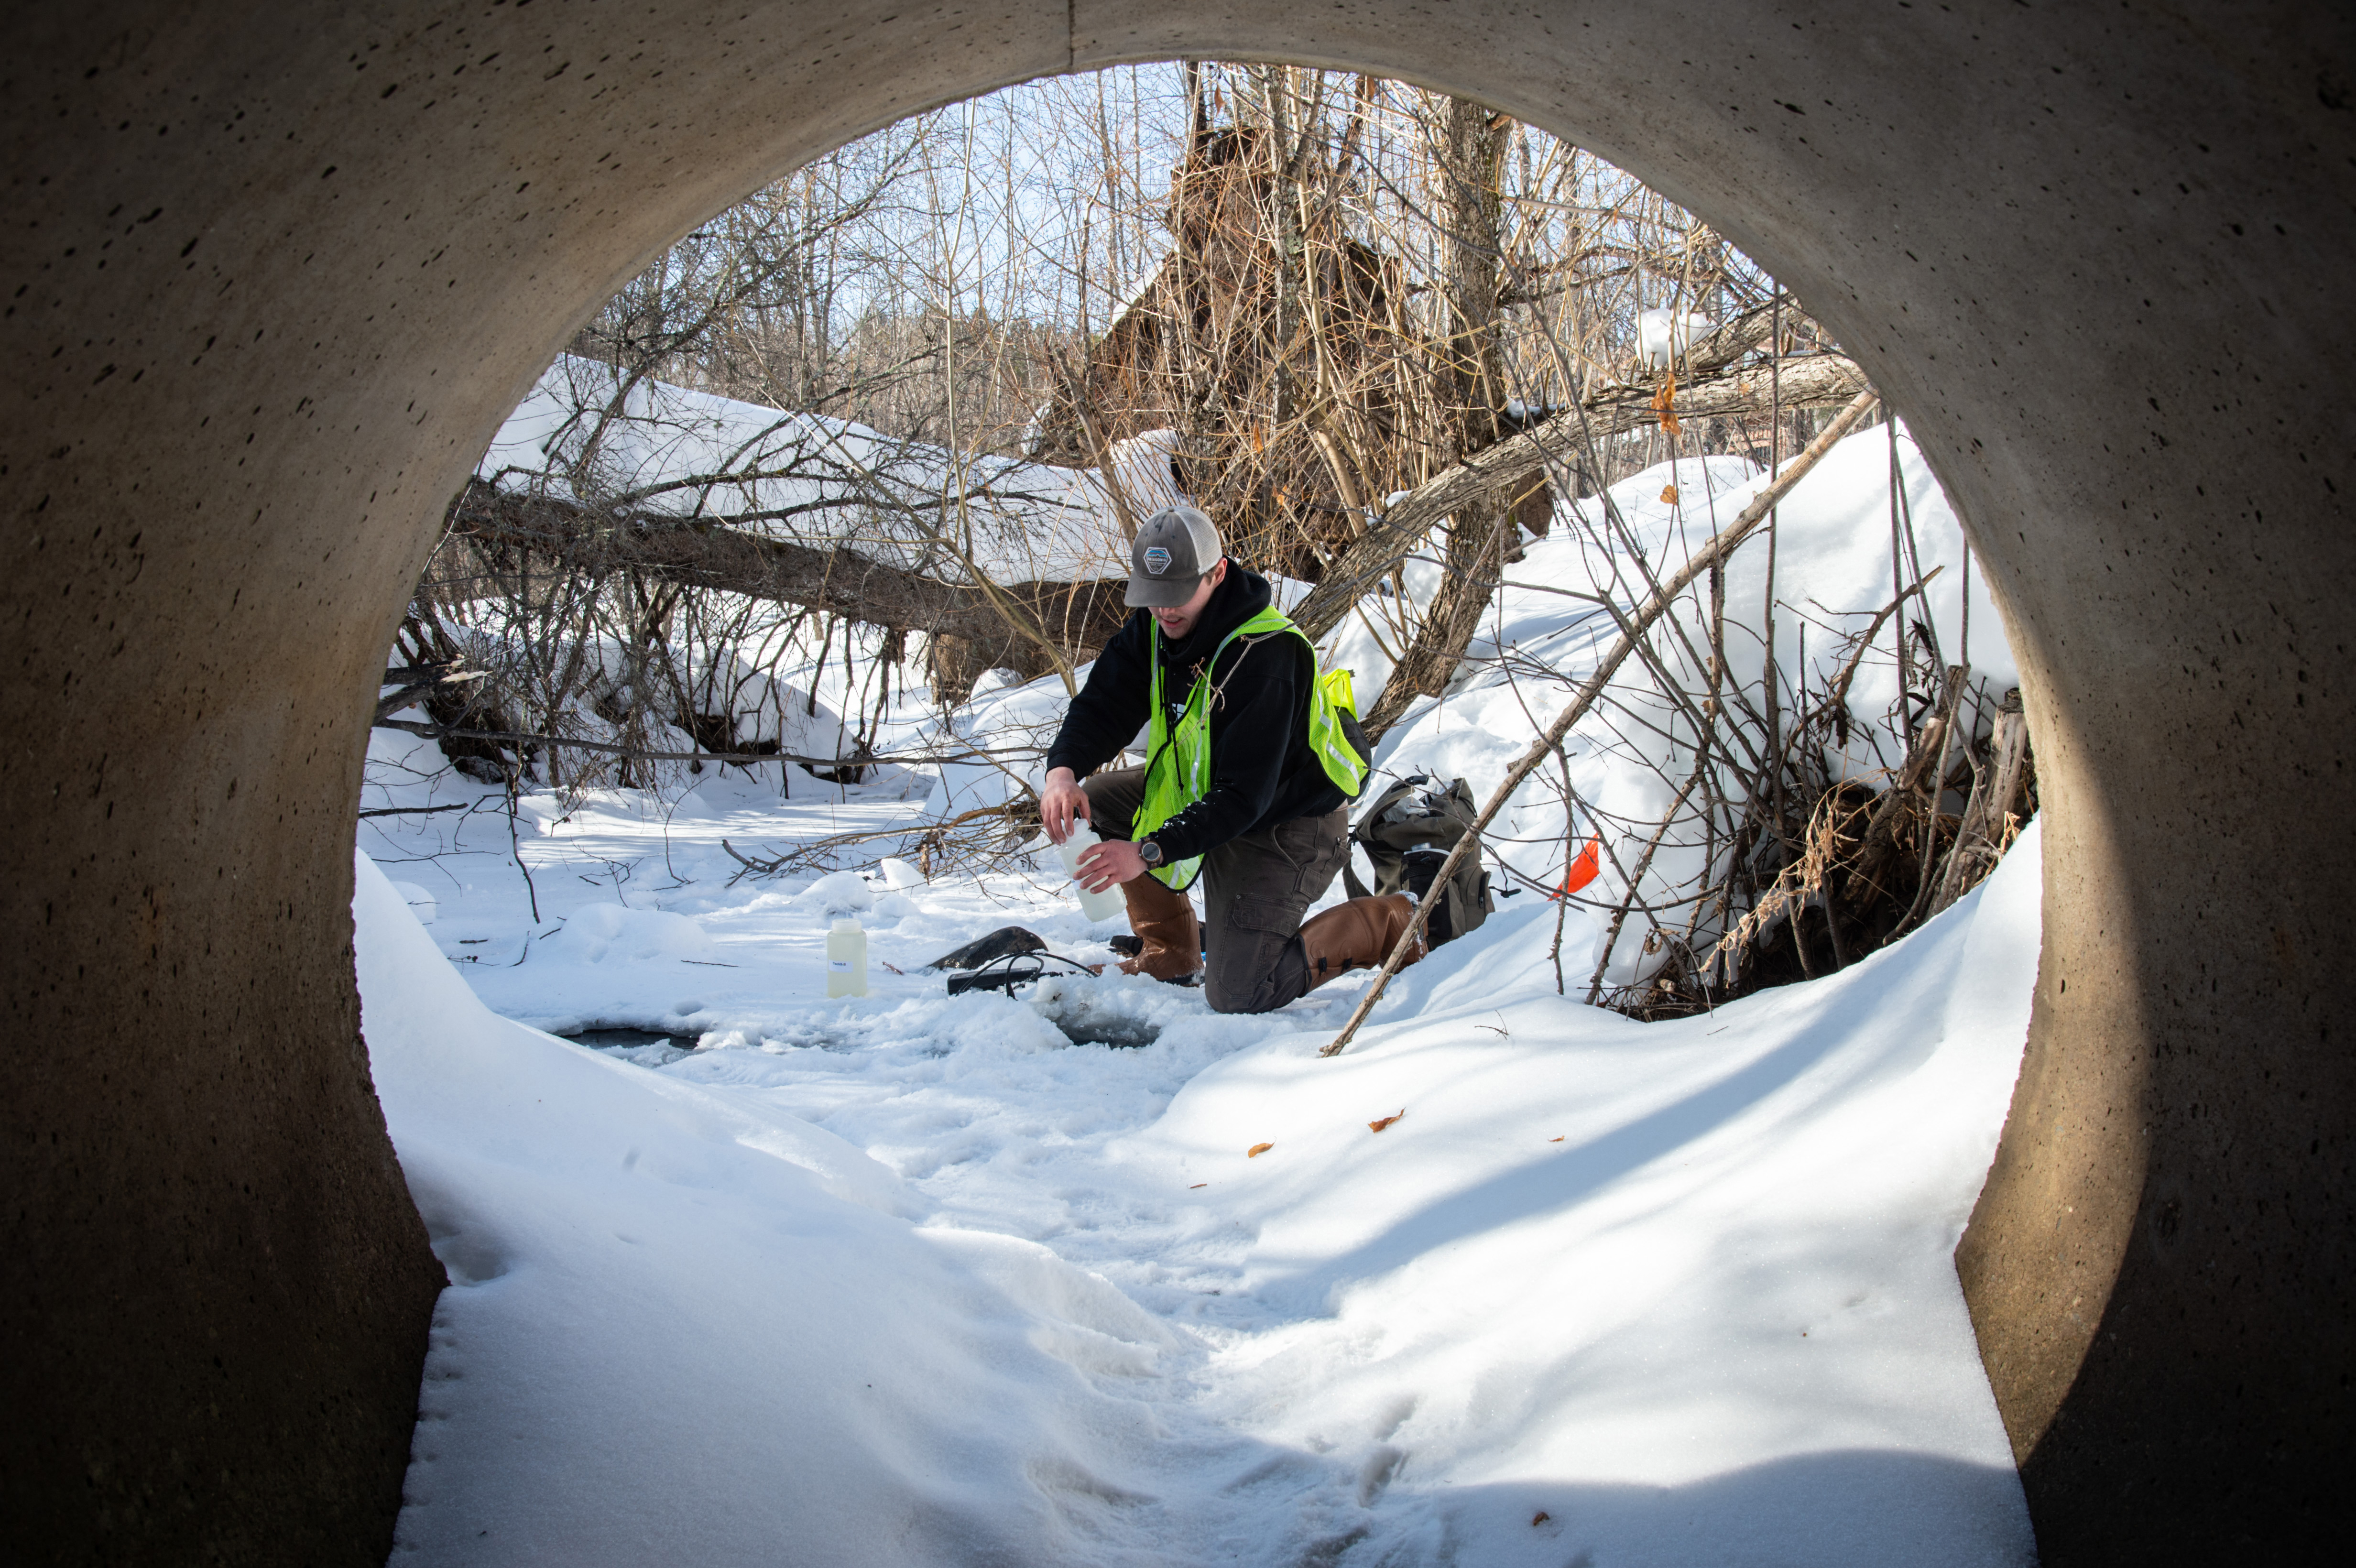 Man kneeling on frozen stream collecting water through hole in ice.